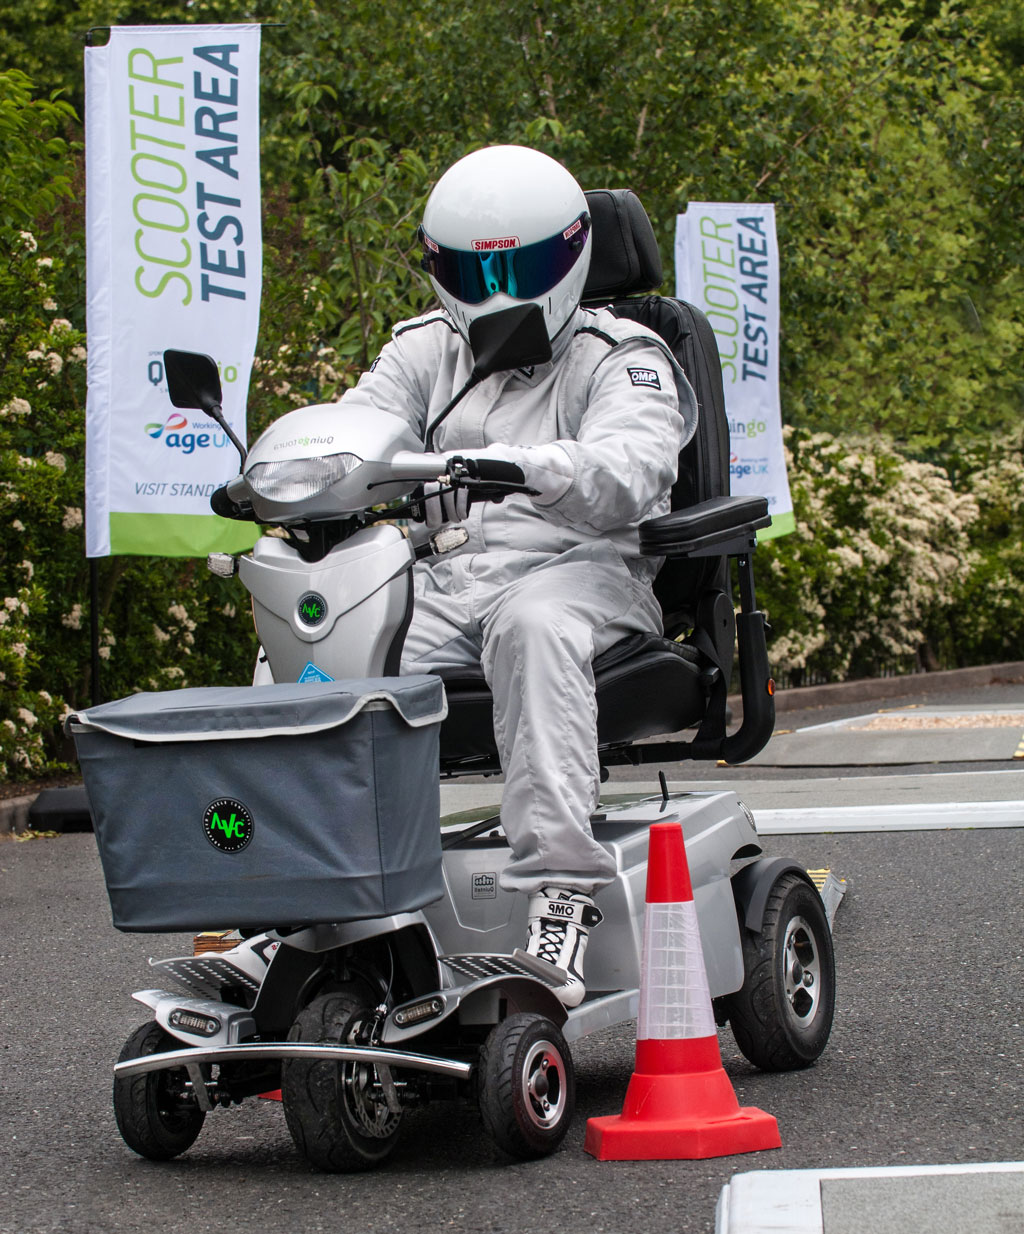 The Stig - Probably the first to Ask "How fast are mobility scooters?"